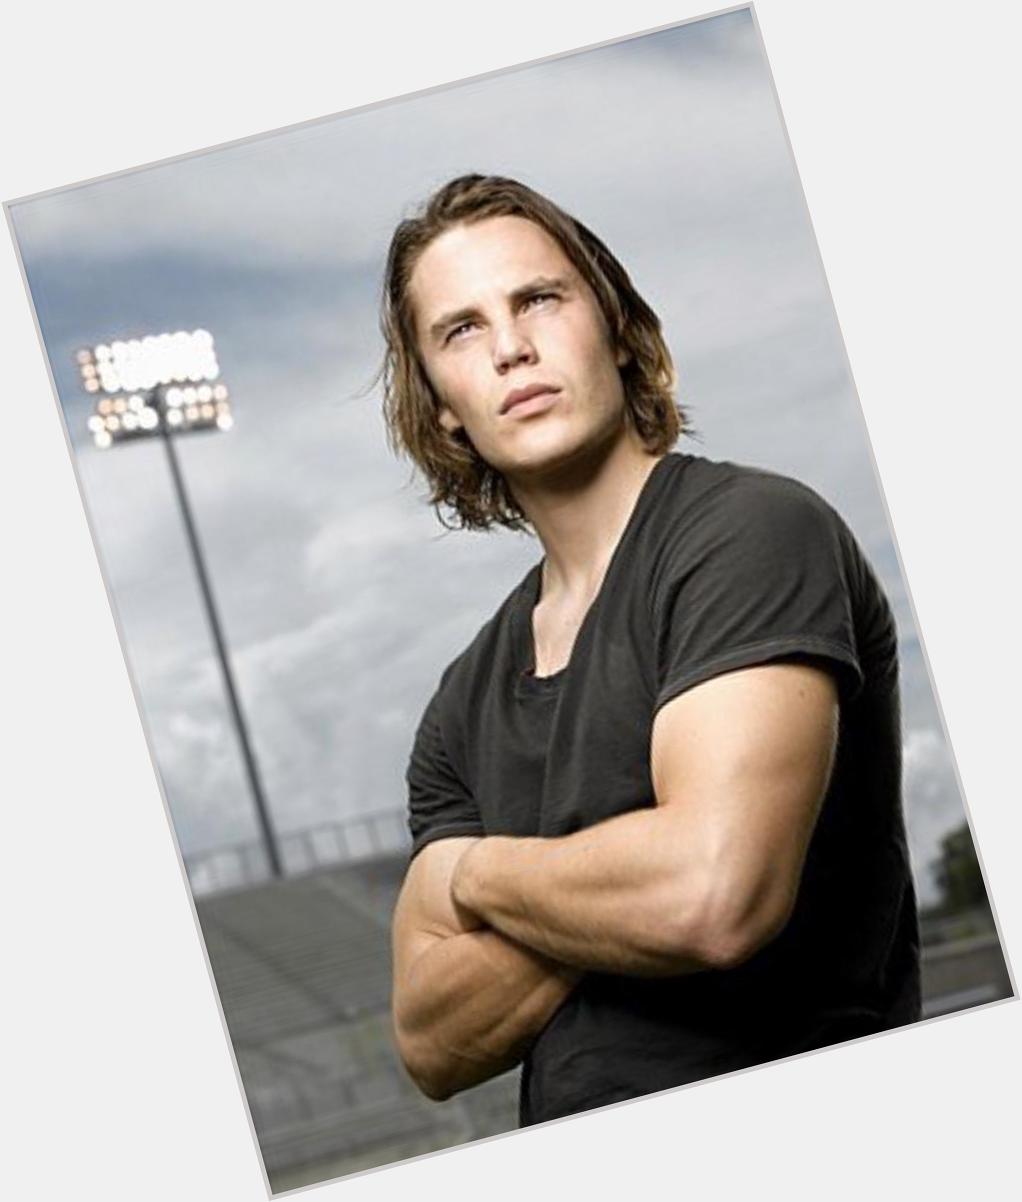 Happy Time, people!

Happy 34th birthday, Taylor Kitsch.

Texas forever   